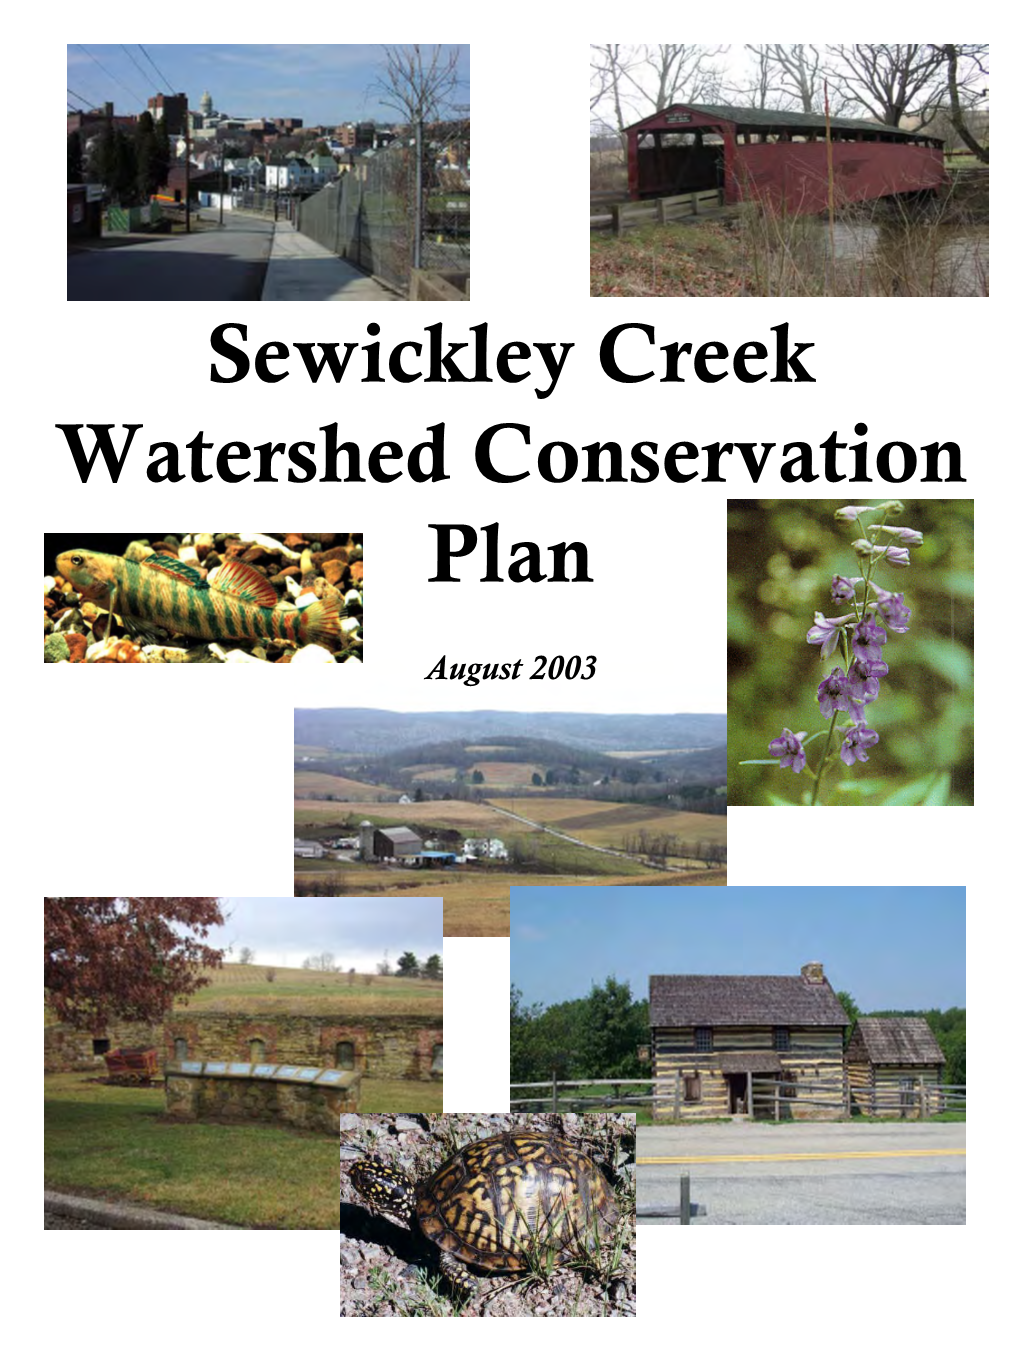 Sewickley Creek Watershed Conservation Plan